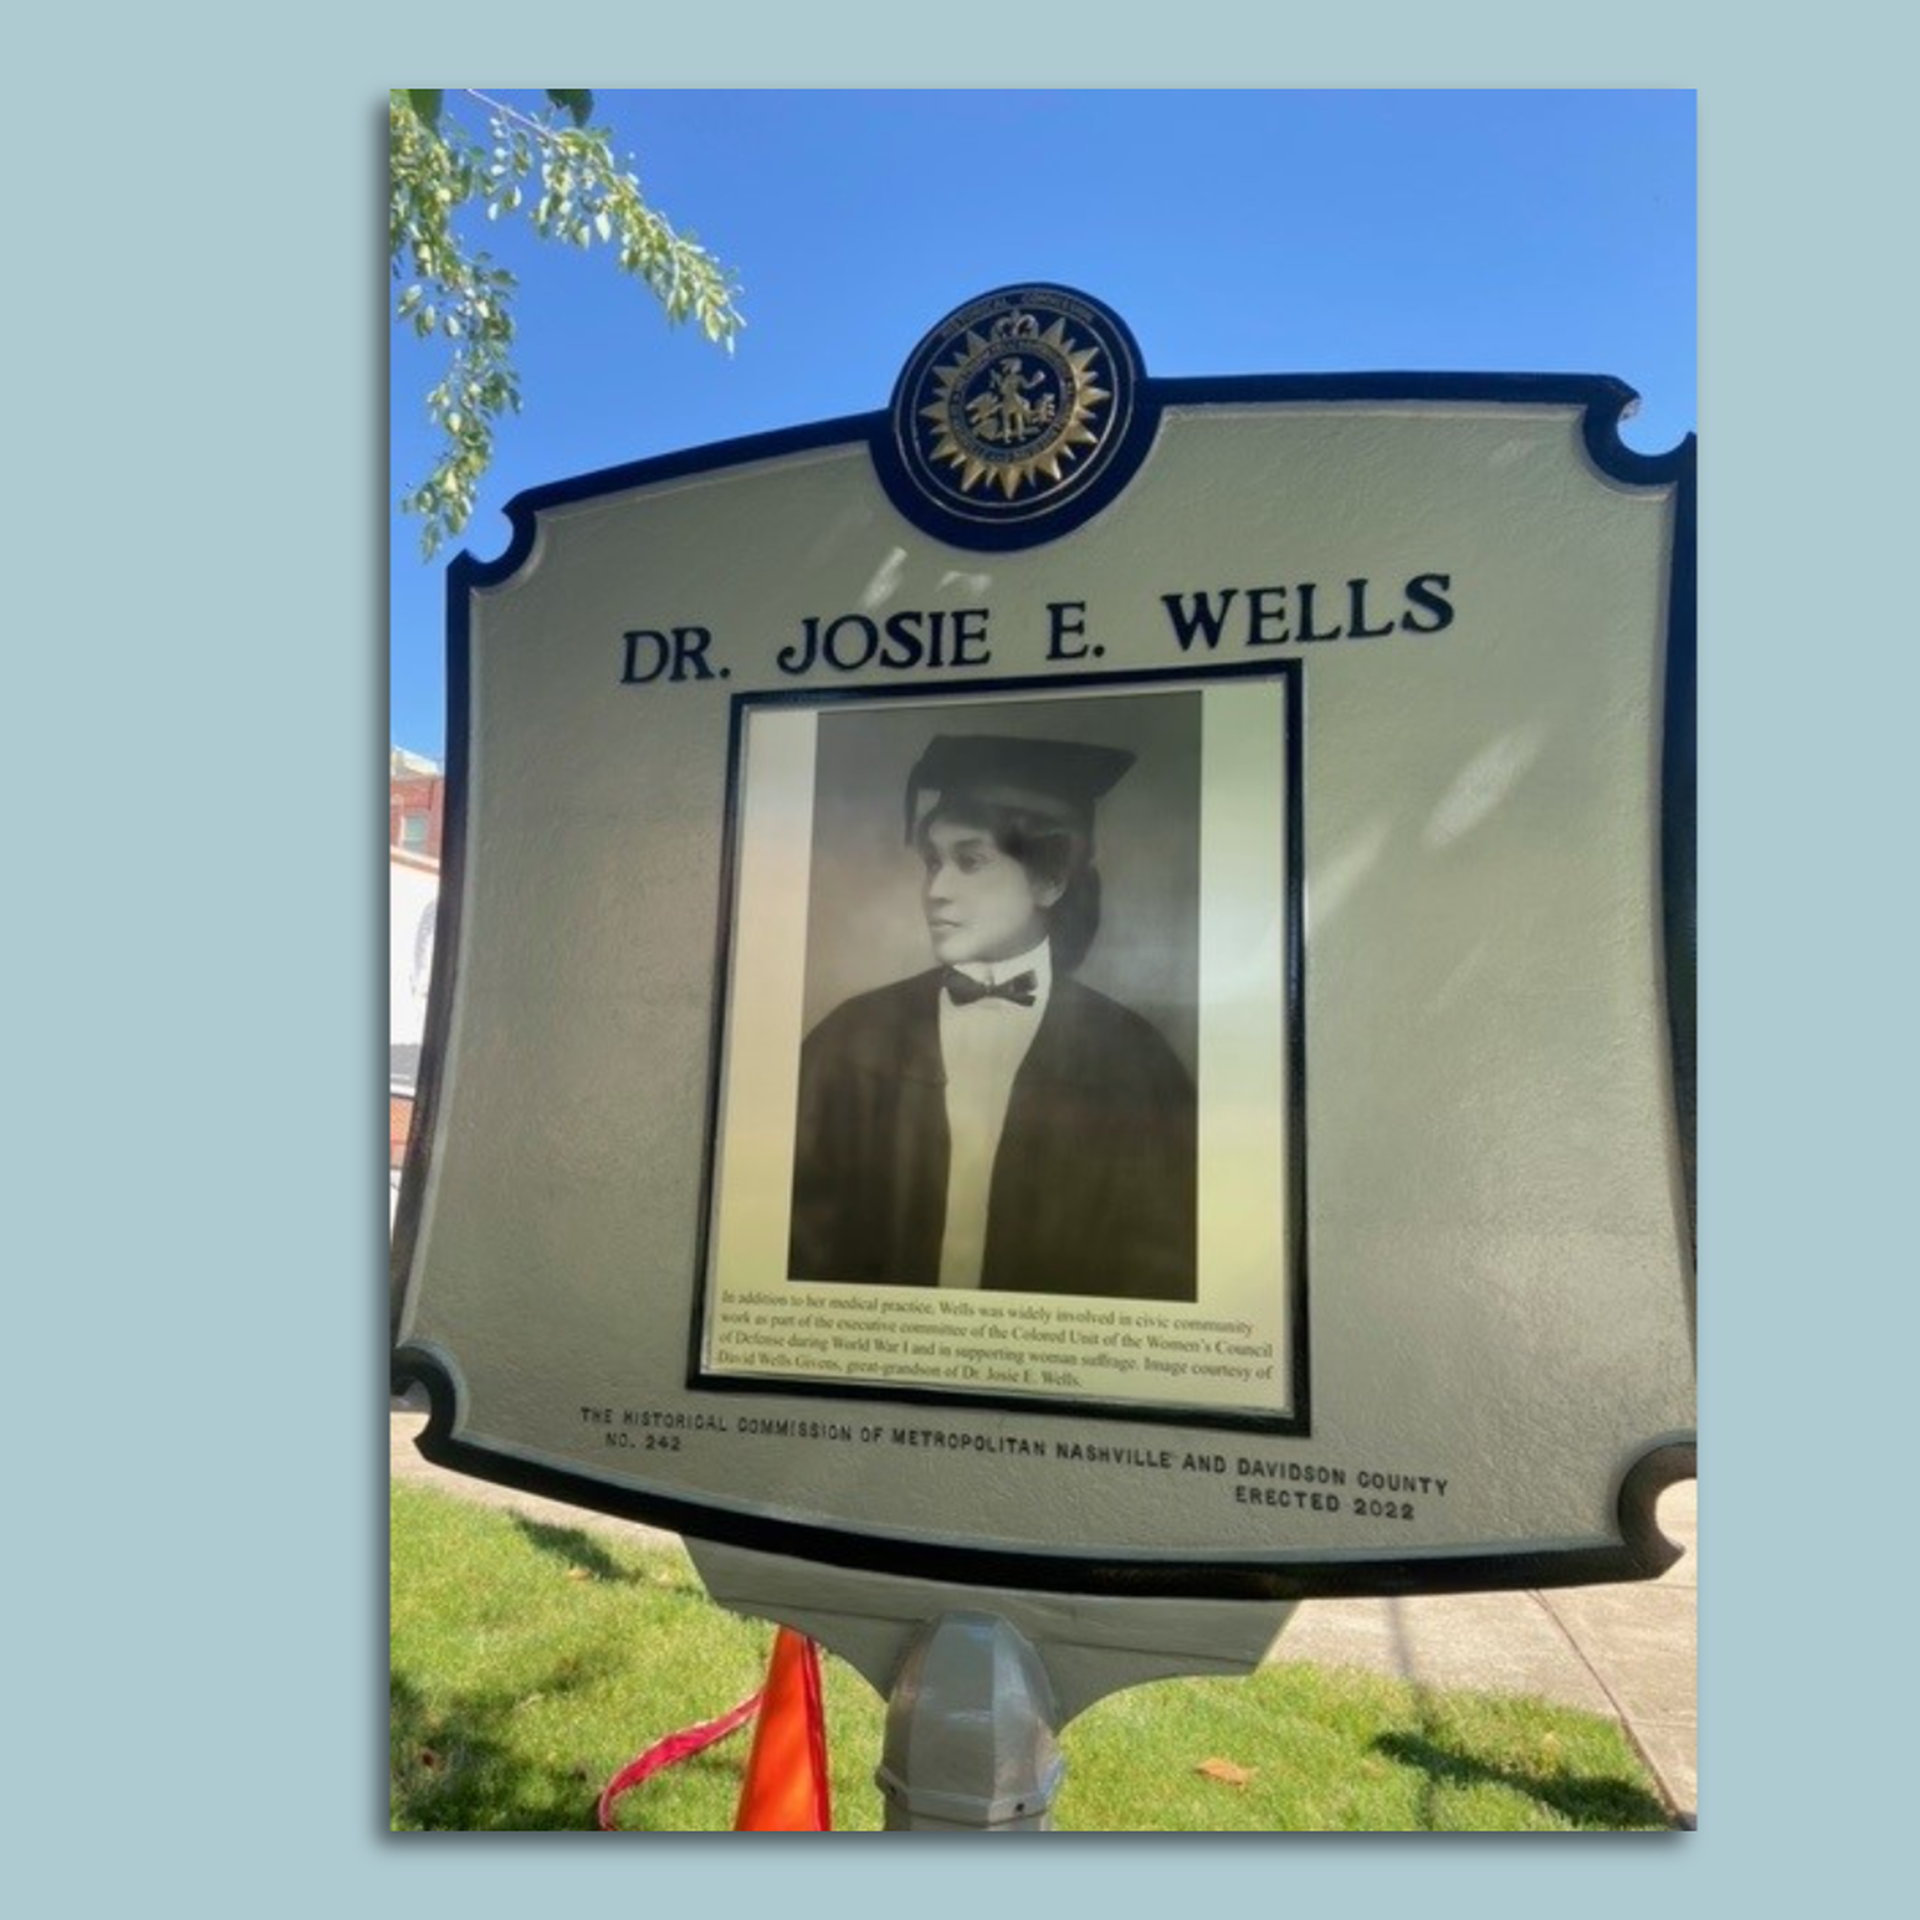 A historical marker for Dr. Josie E. Wells.